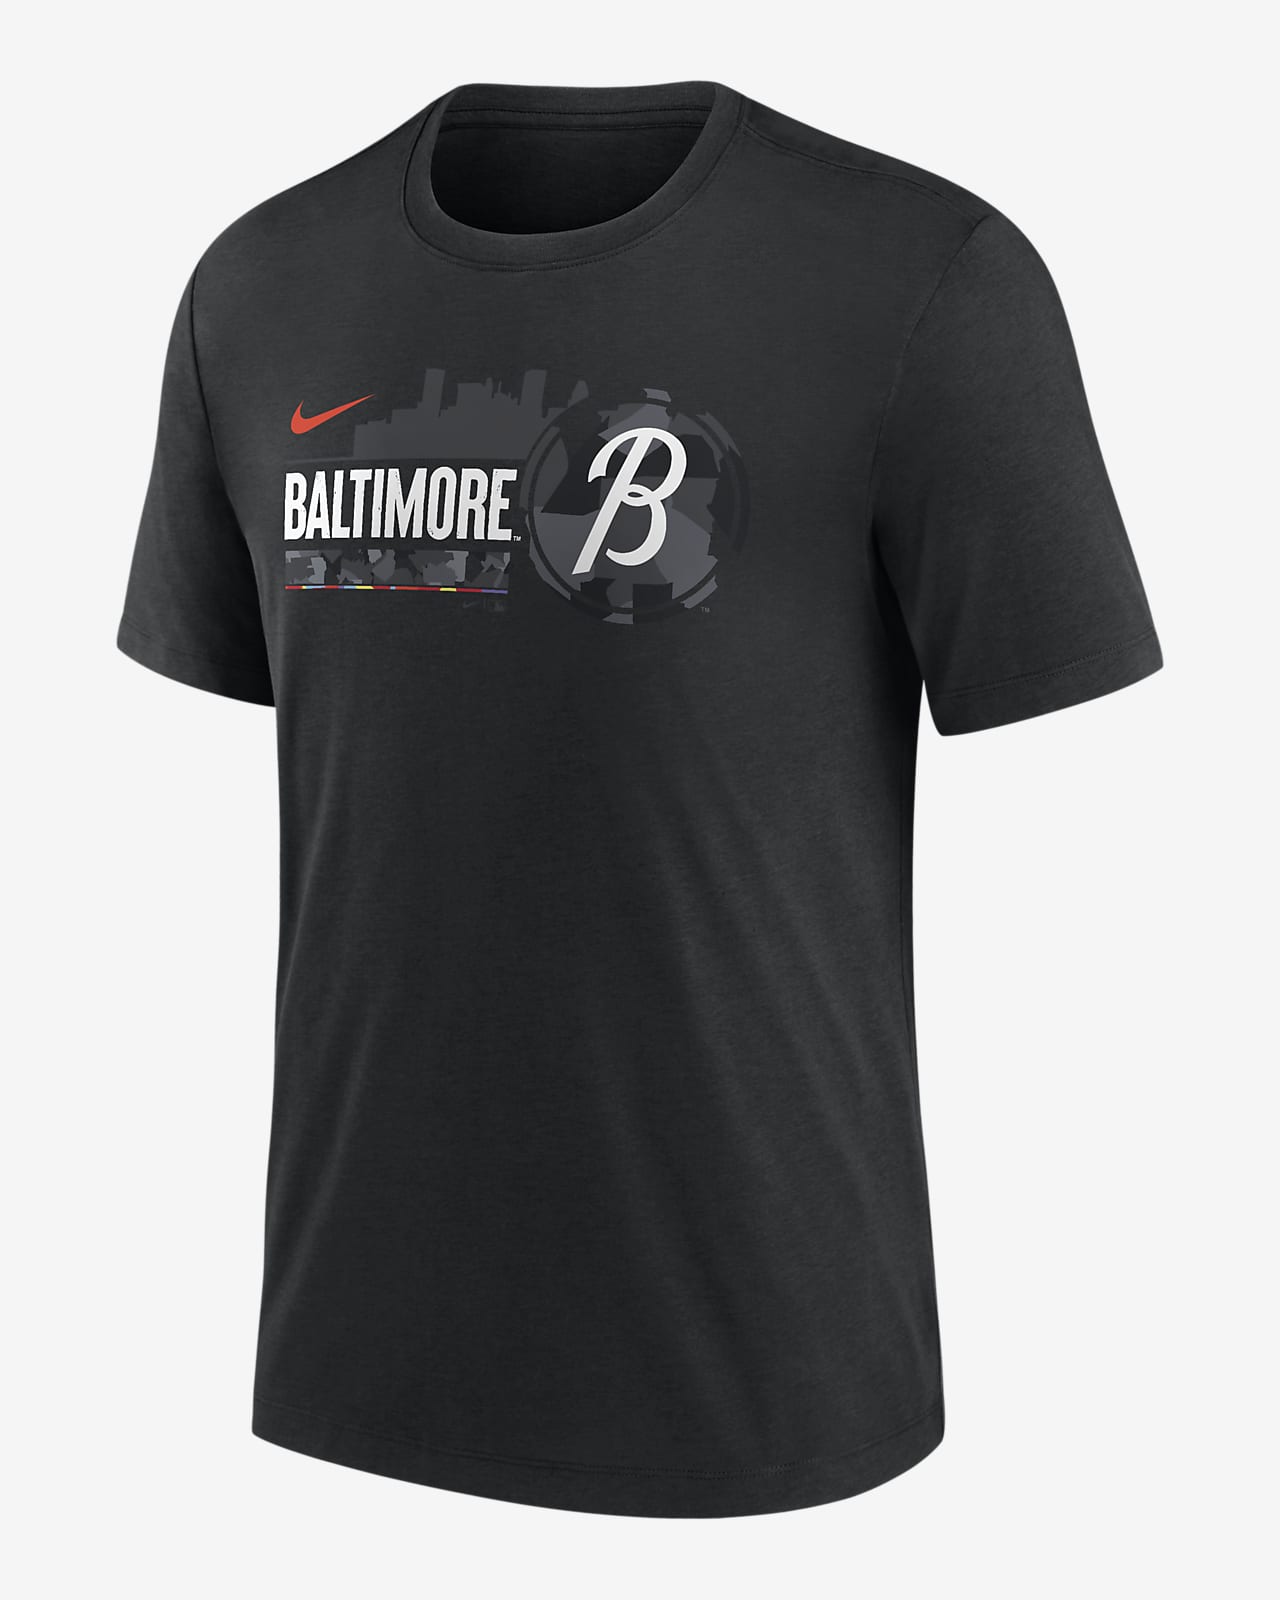 Baltimore Orioles 2023 city connect shirt t-shirt by To-Tee